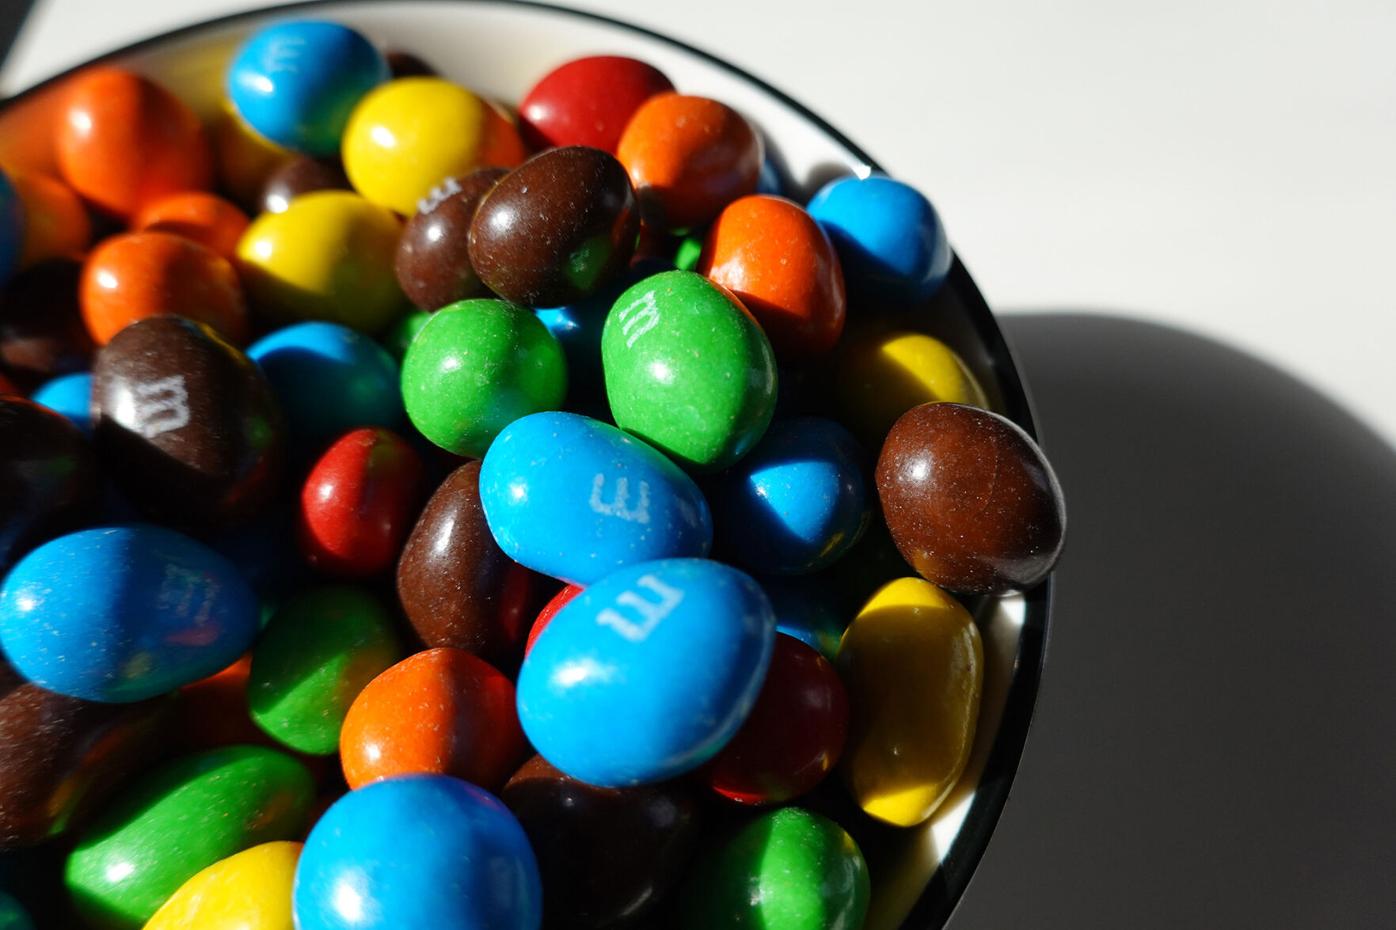 M&Ms introduces first new character in more than a decade: Purple - CBS News